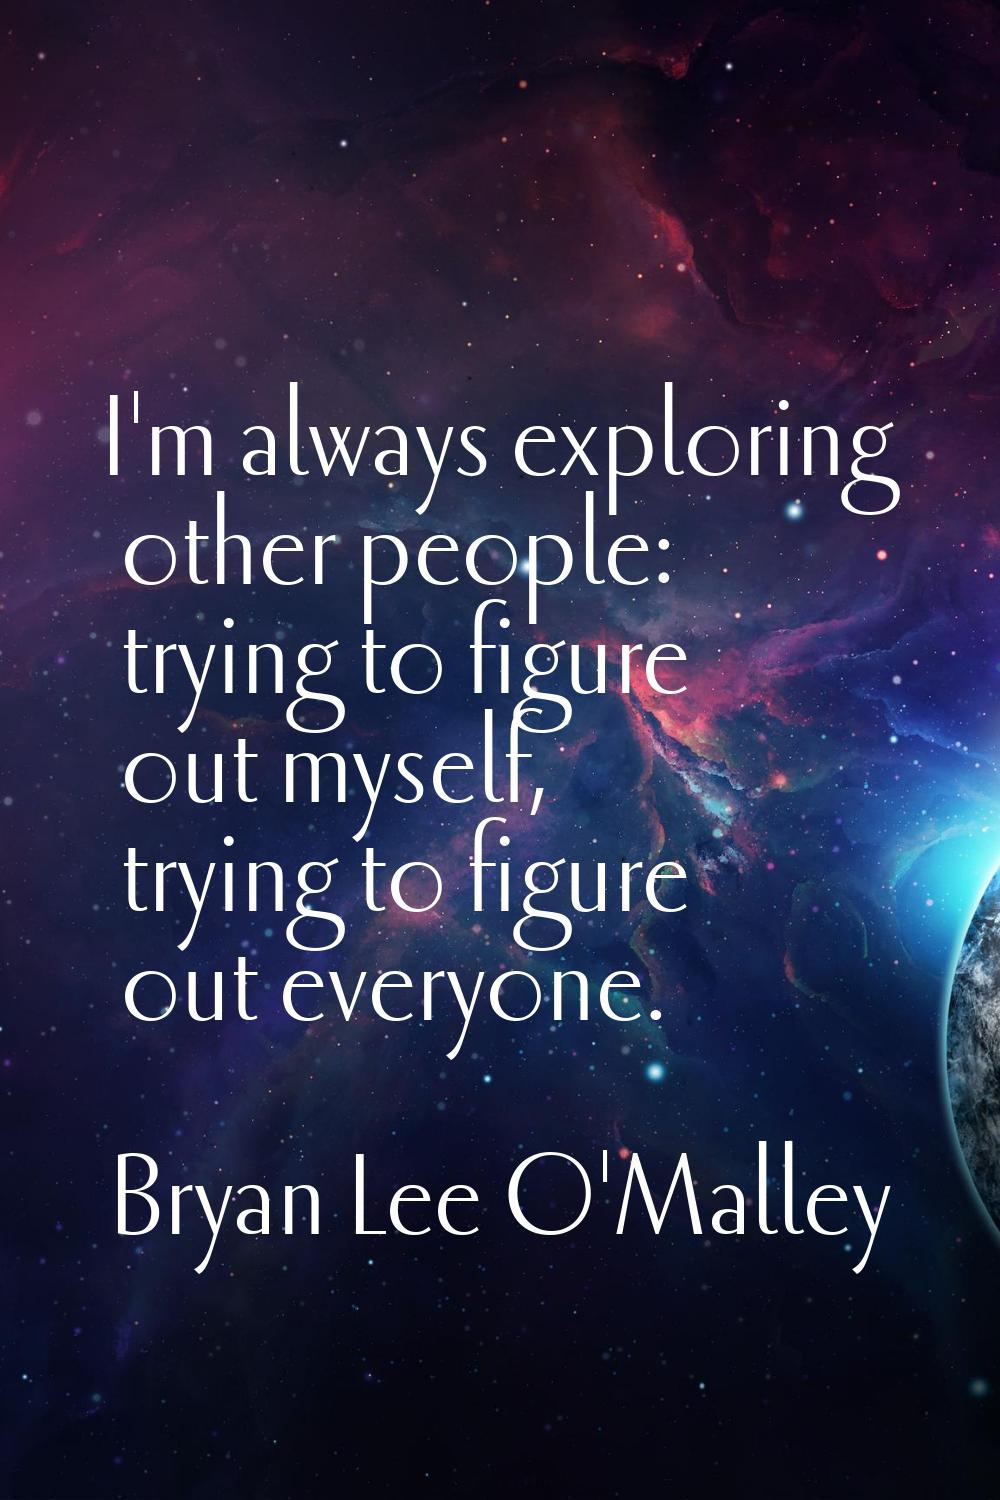 I'm always exploring other people: trying to figure out myself, trying to figure out everyone.